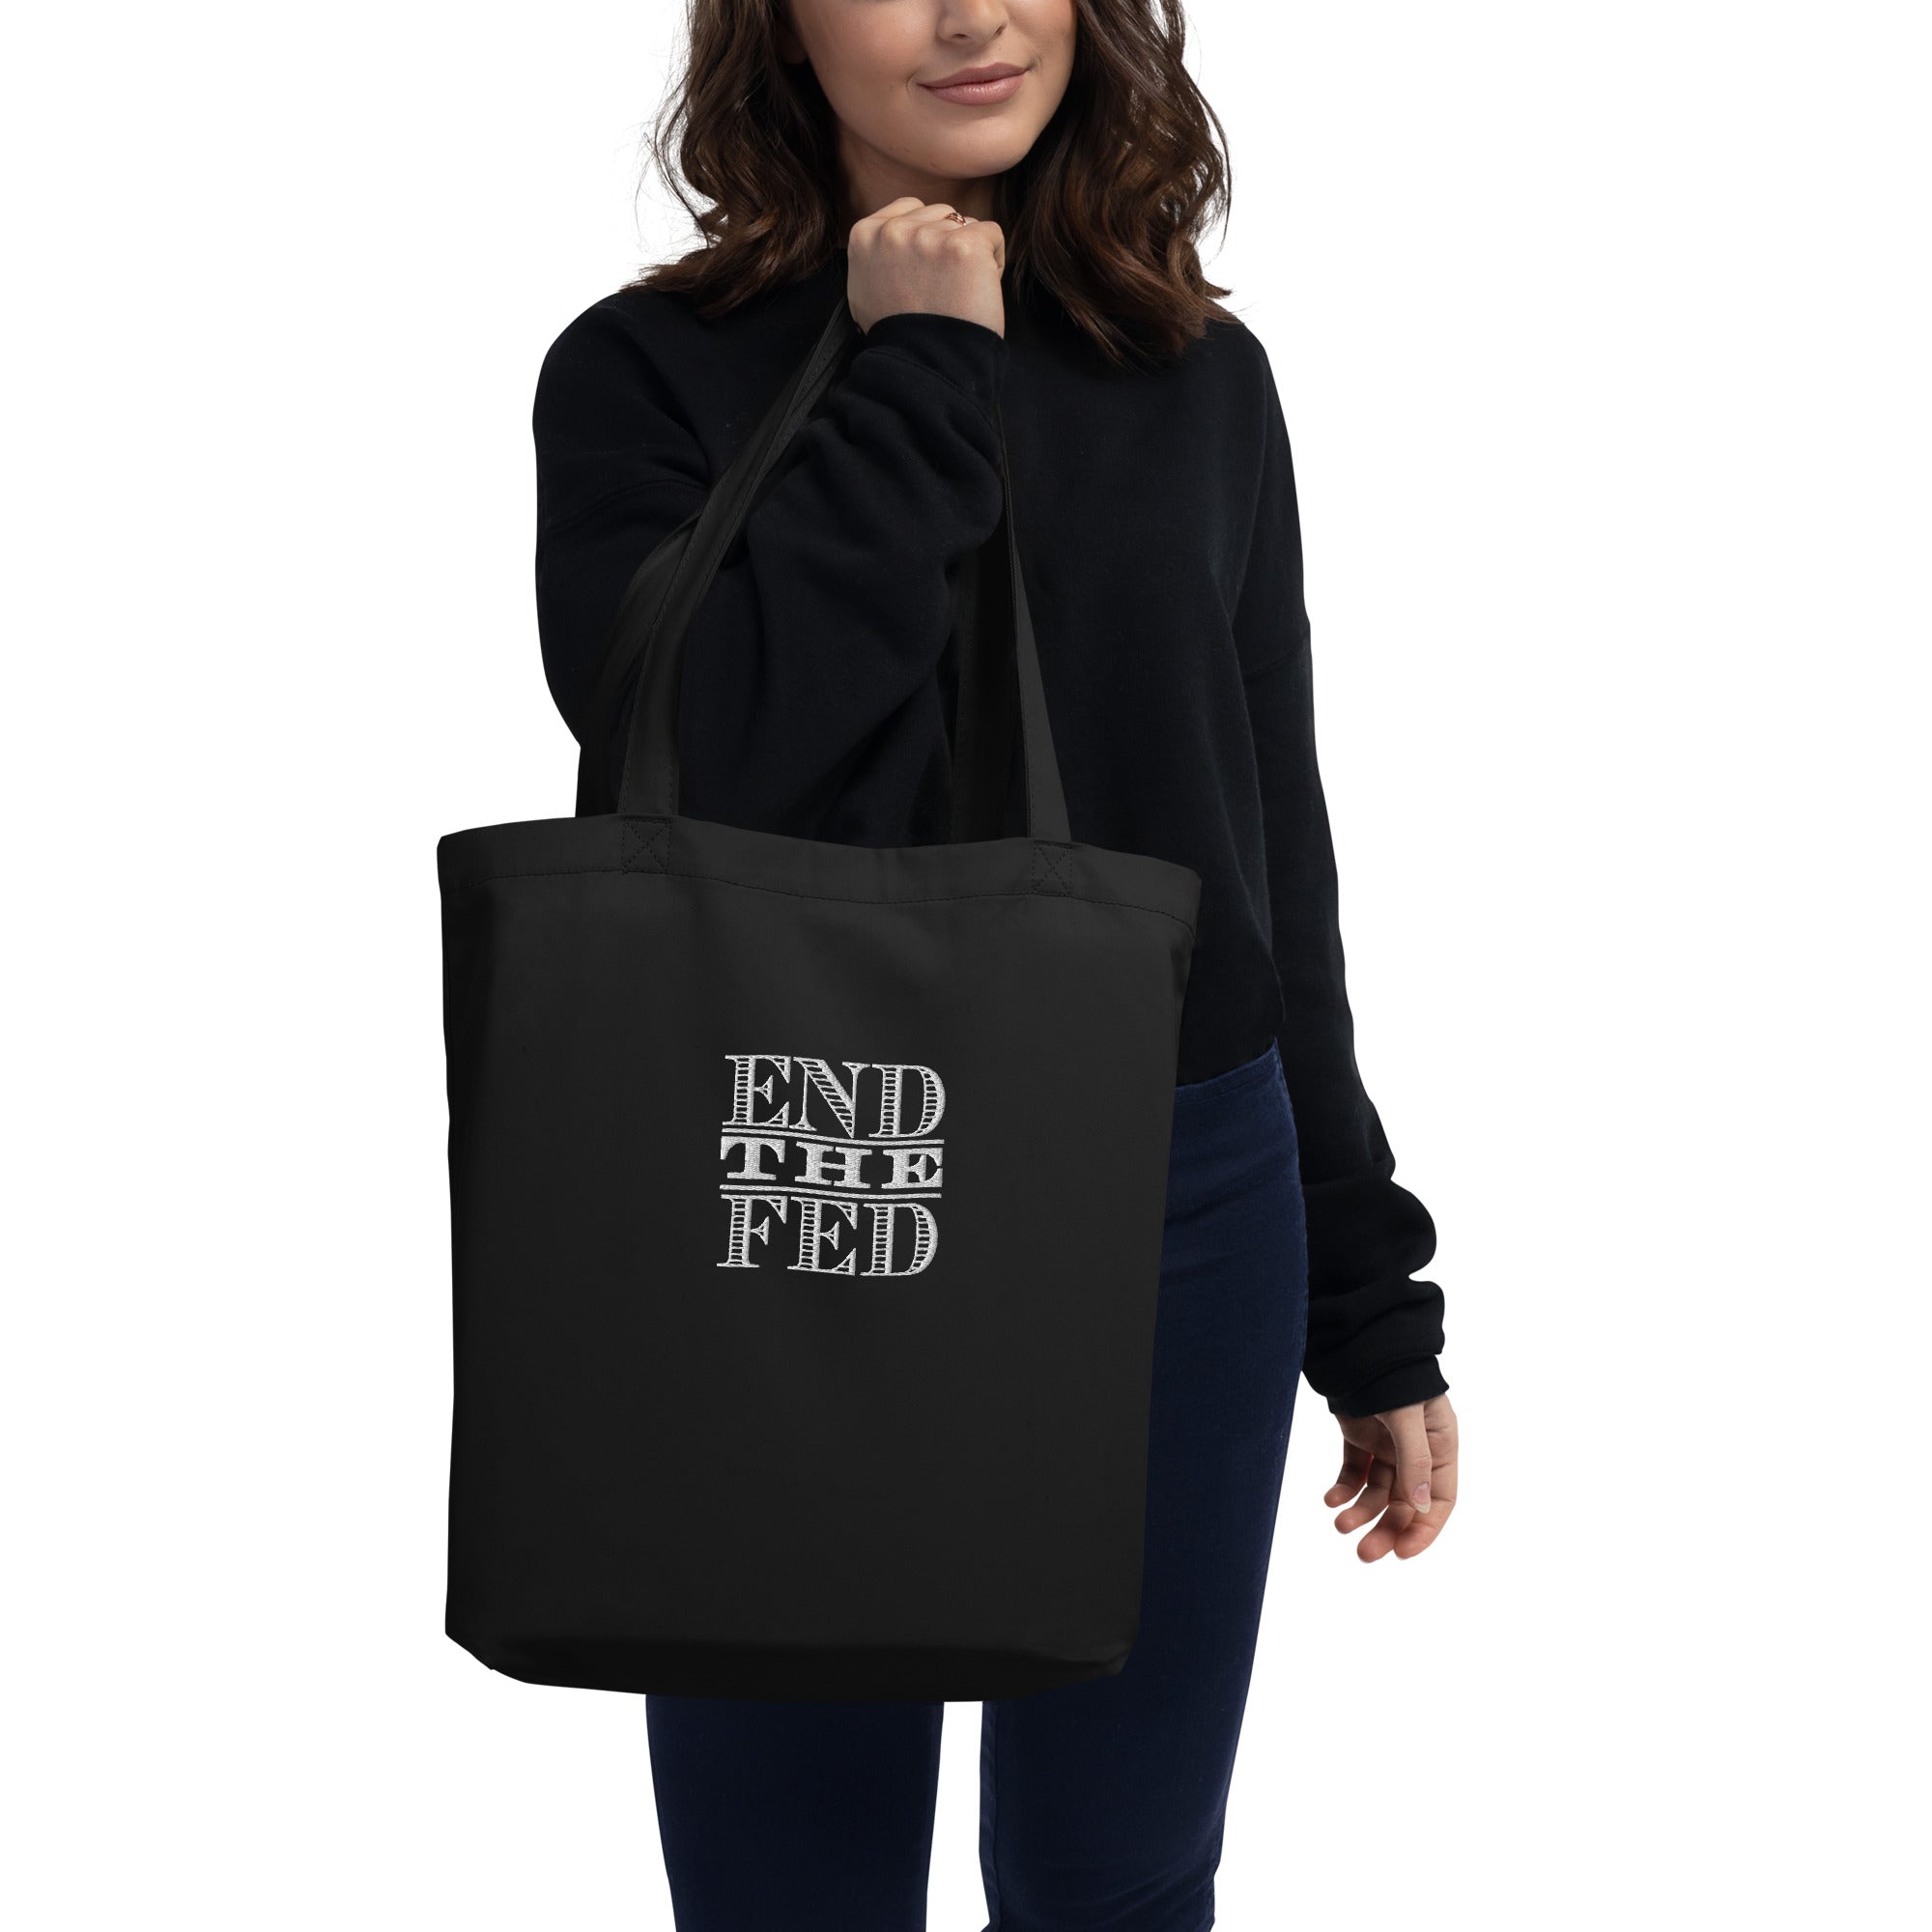 End the Fed Embroidered Eco Tote Bag